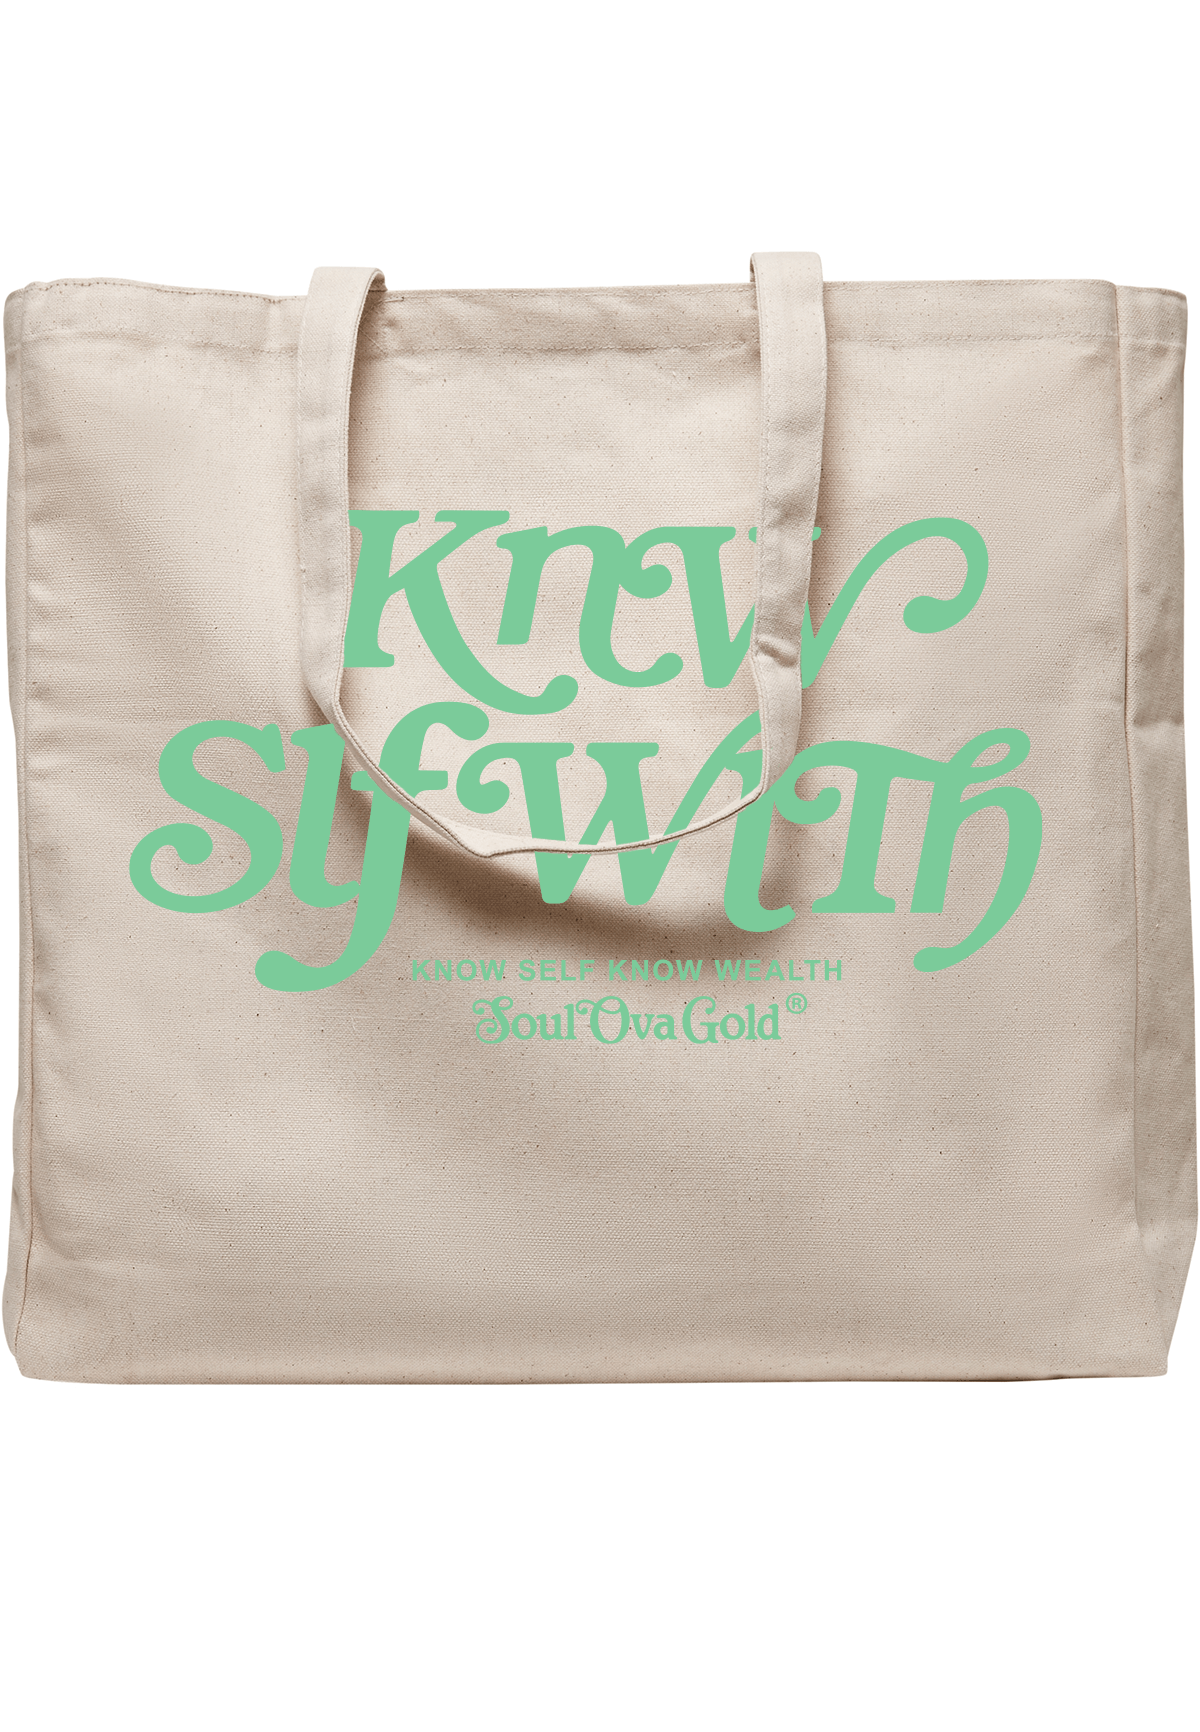 Soul Ova Gold Tote Bags S & S Off White Tote Bag (Mint Green)